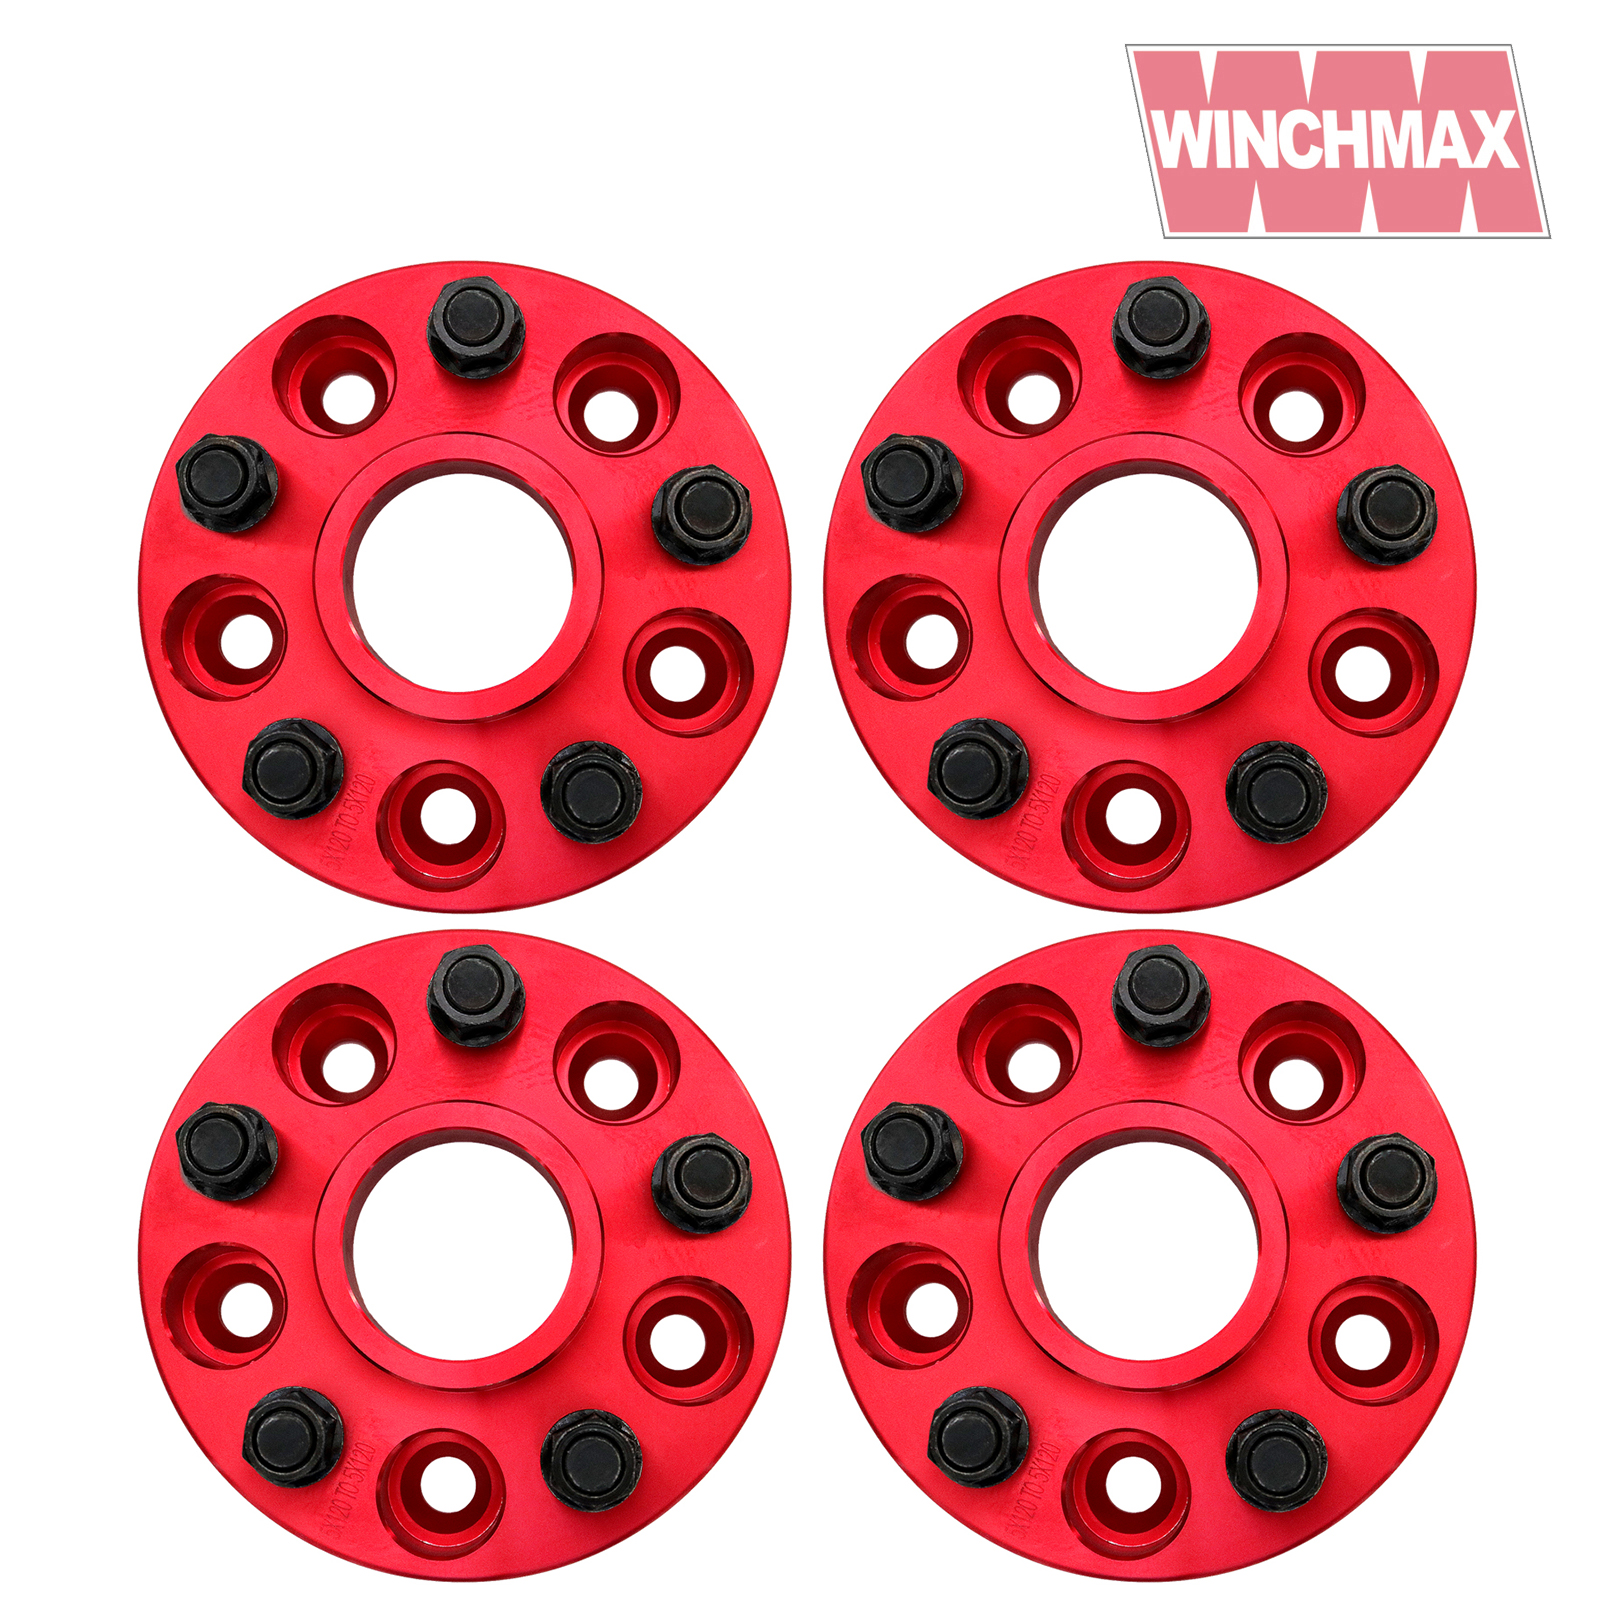 Winchmax Wheel Spacer